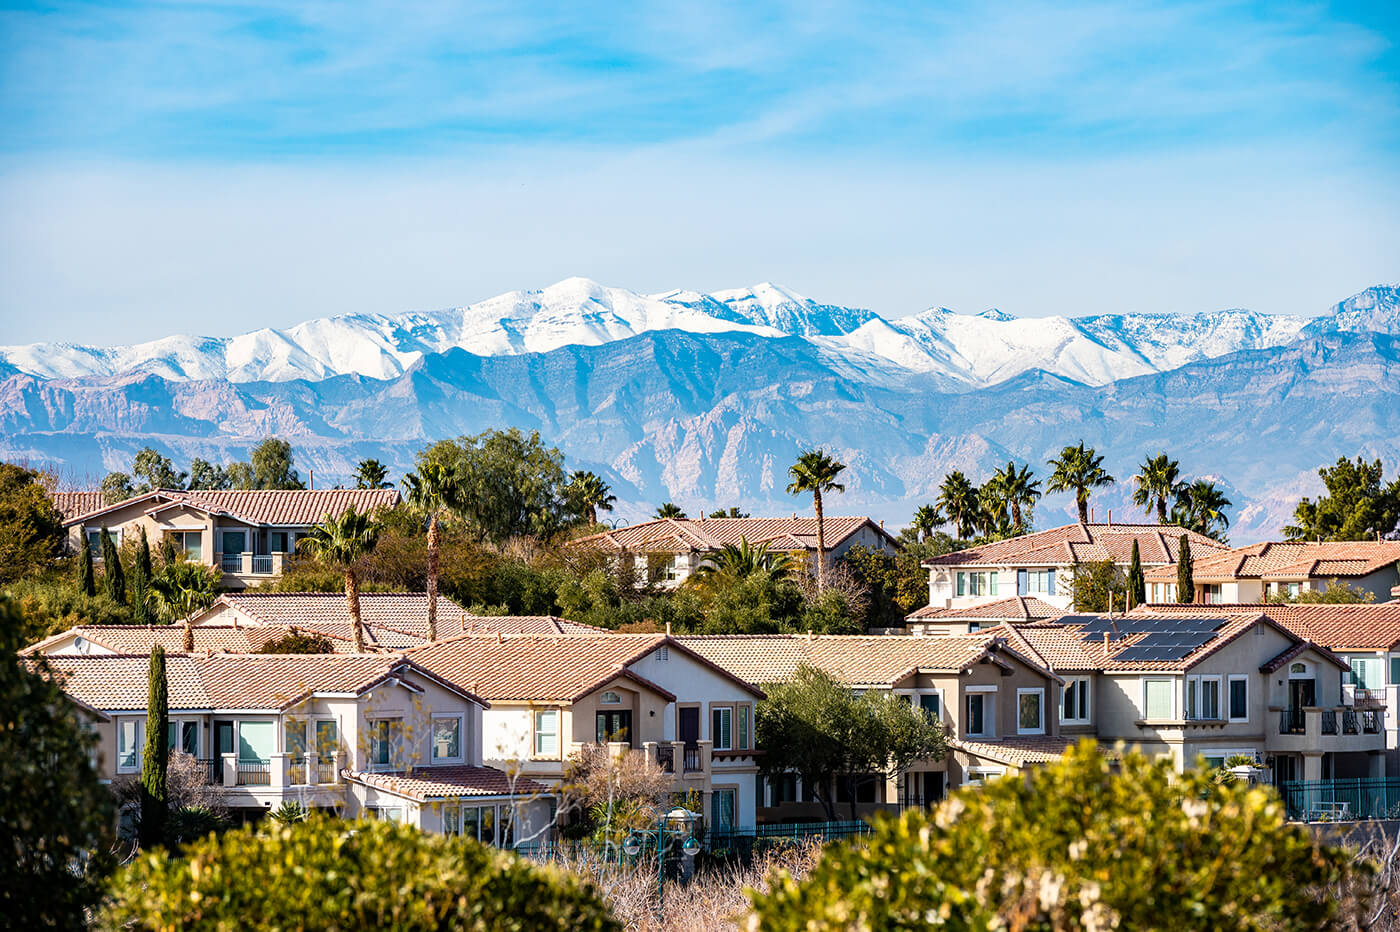 View of snow covered mountains in Las Vegas